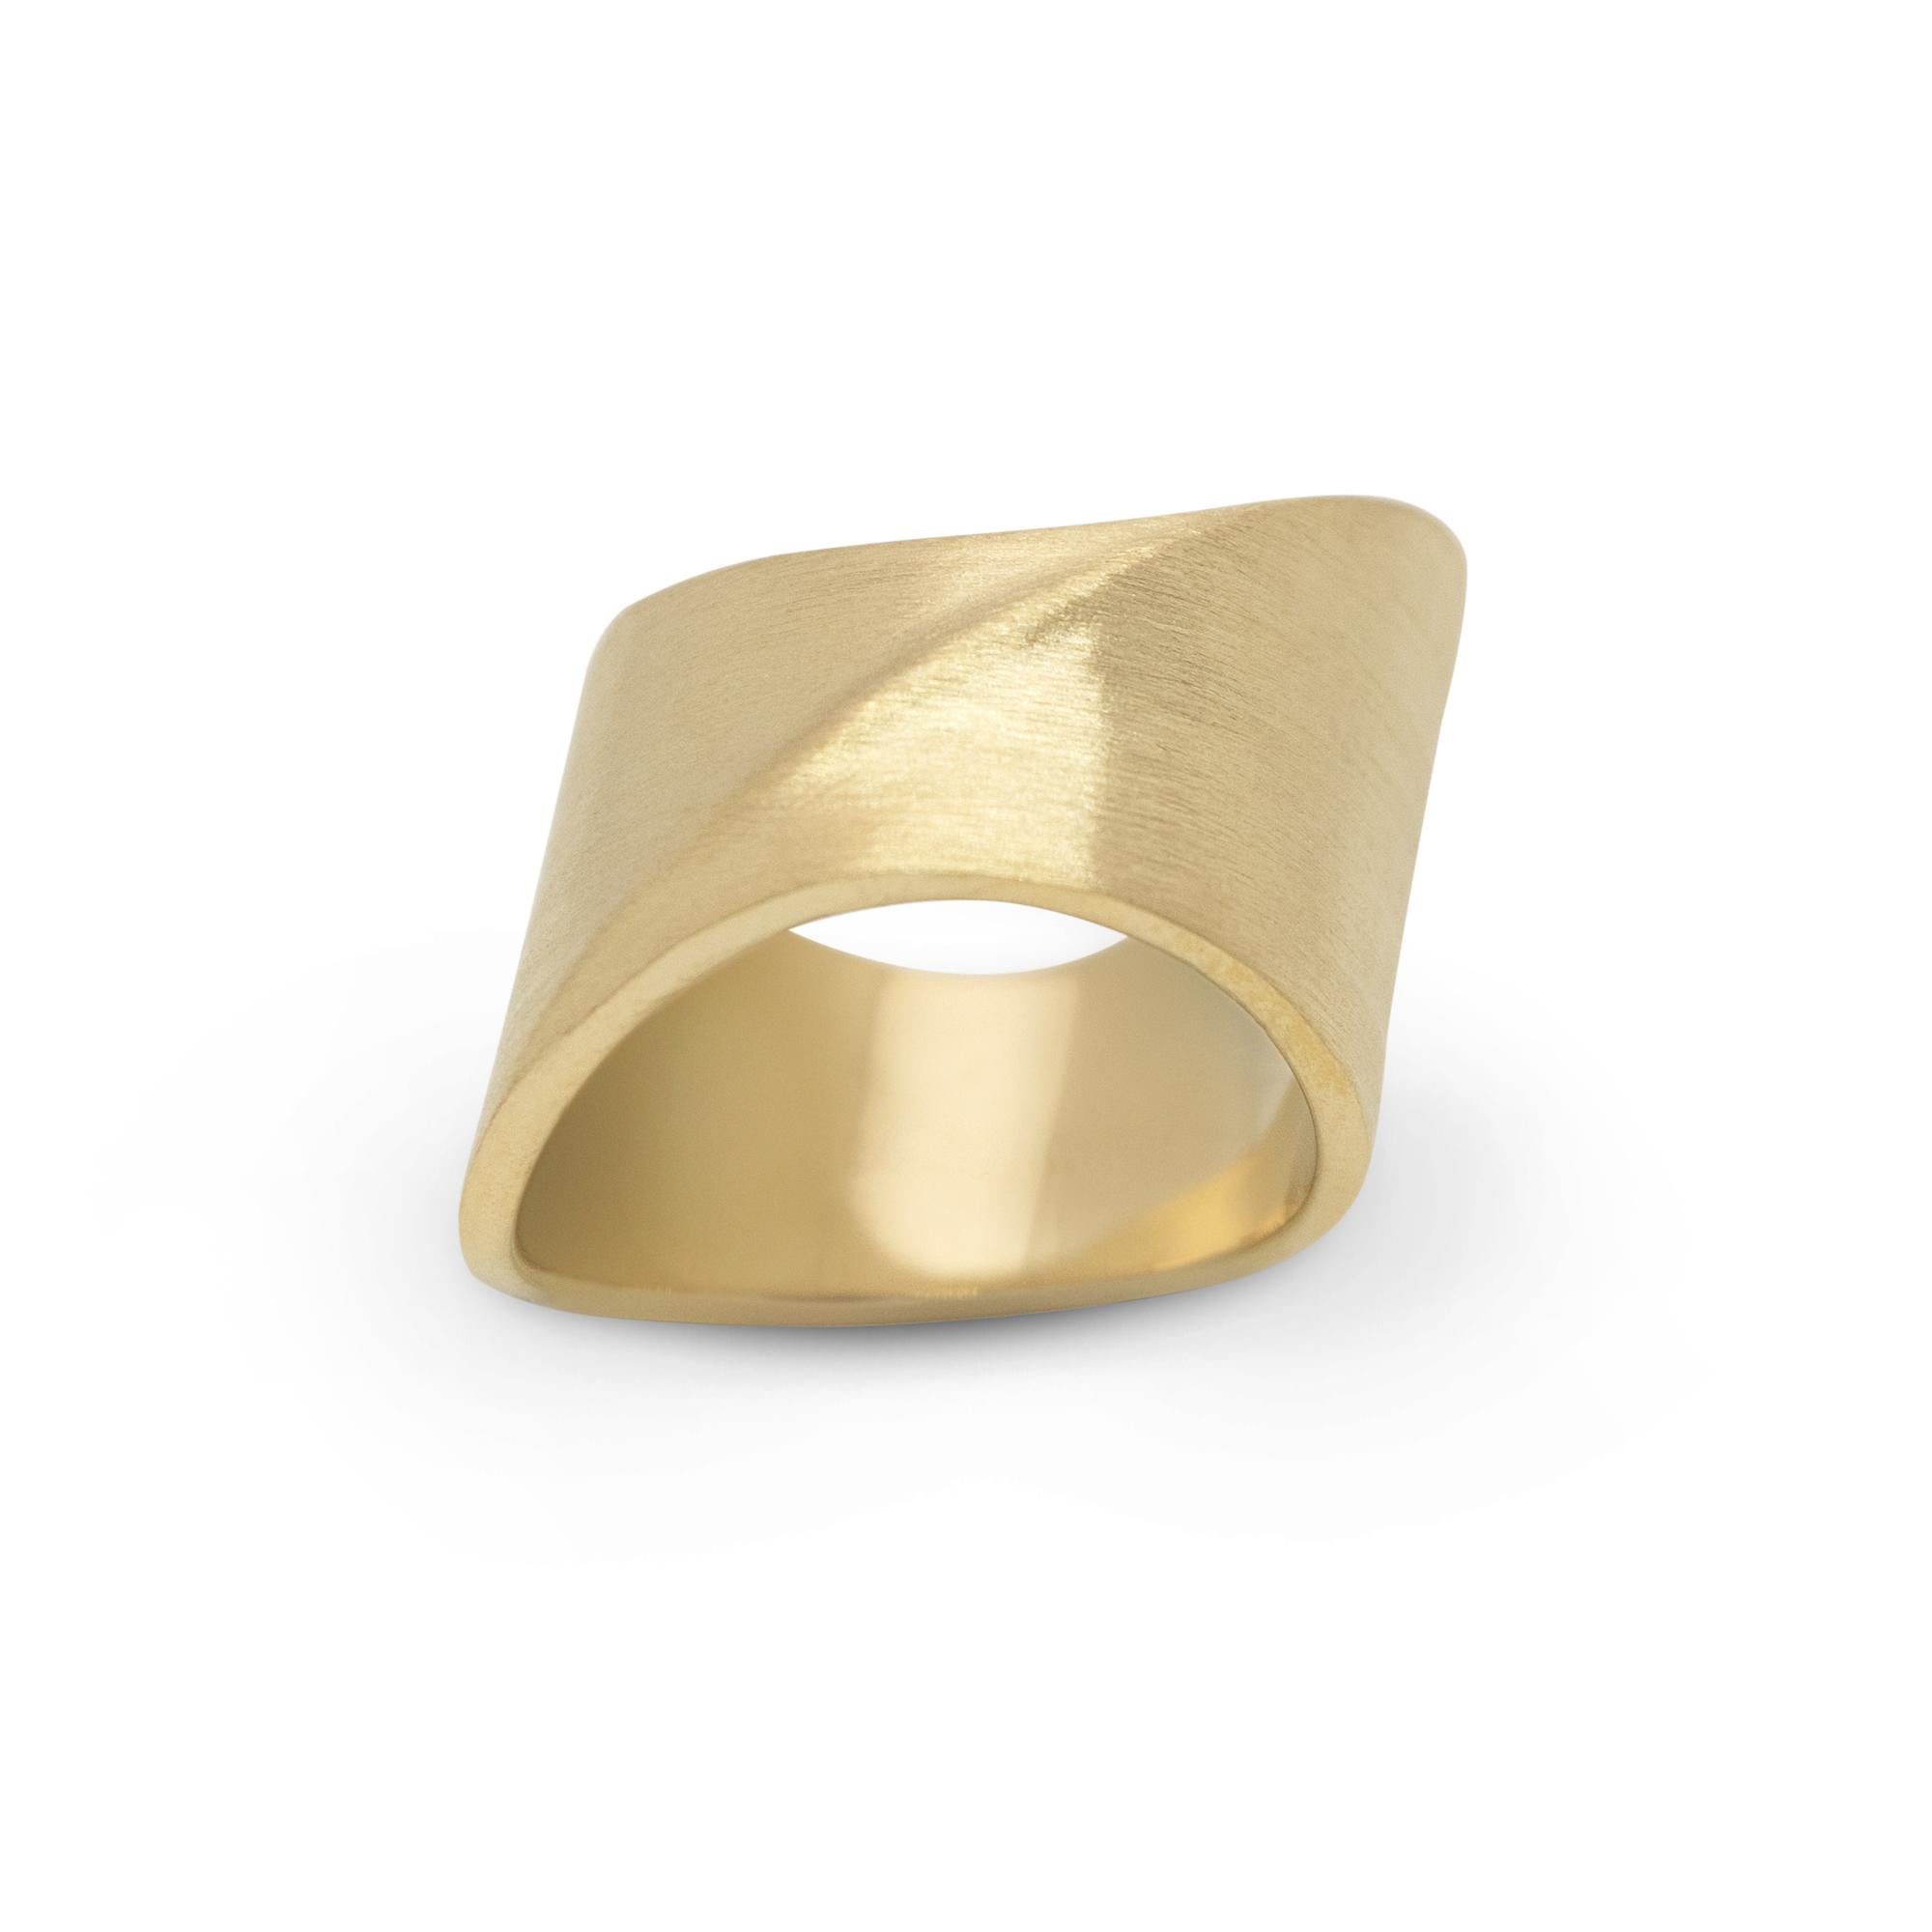 Unisex band ring with a minimalistic and bold design. Perfect worn solo or horizontally stacked with multiple rings from the same collection. 
Size UK I -  48 (mm) in stock, more sizes available upon request, made to order items are not